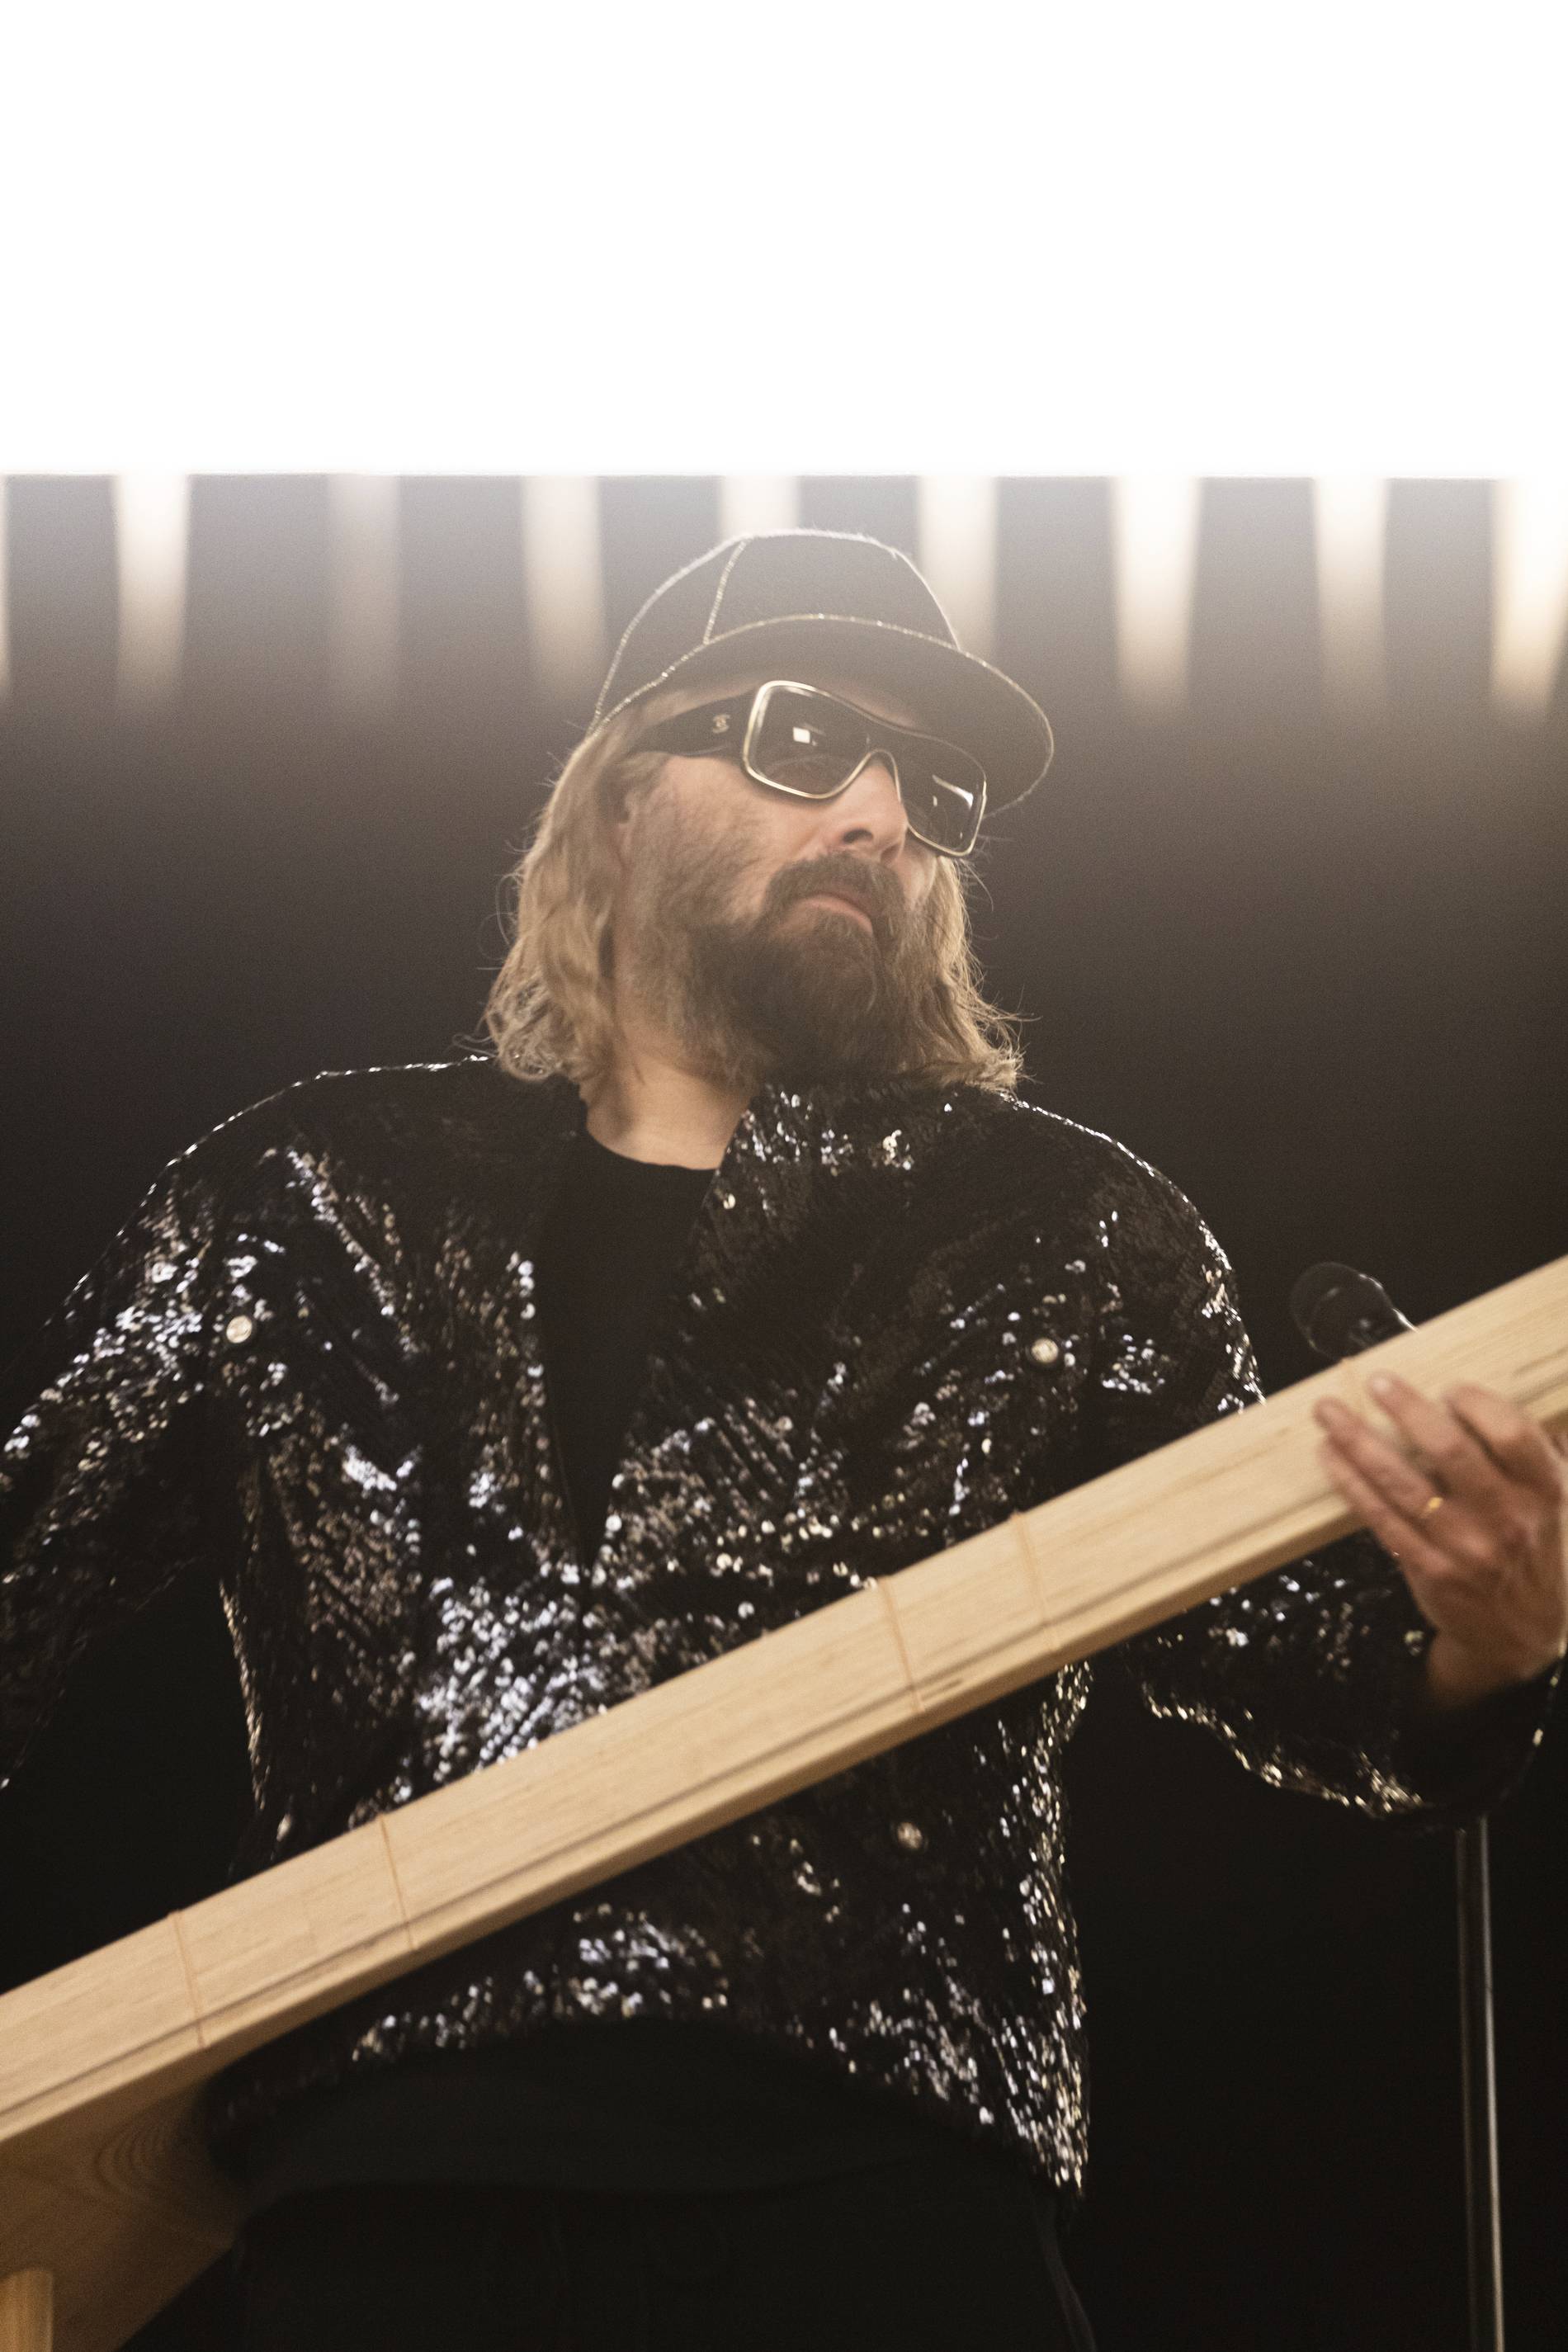 Sebastien Tellier performing at Chanel's 2022 Haute Couture runway show